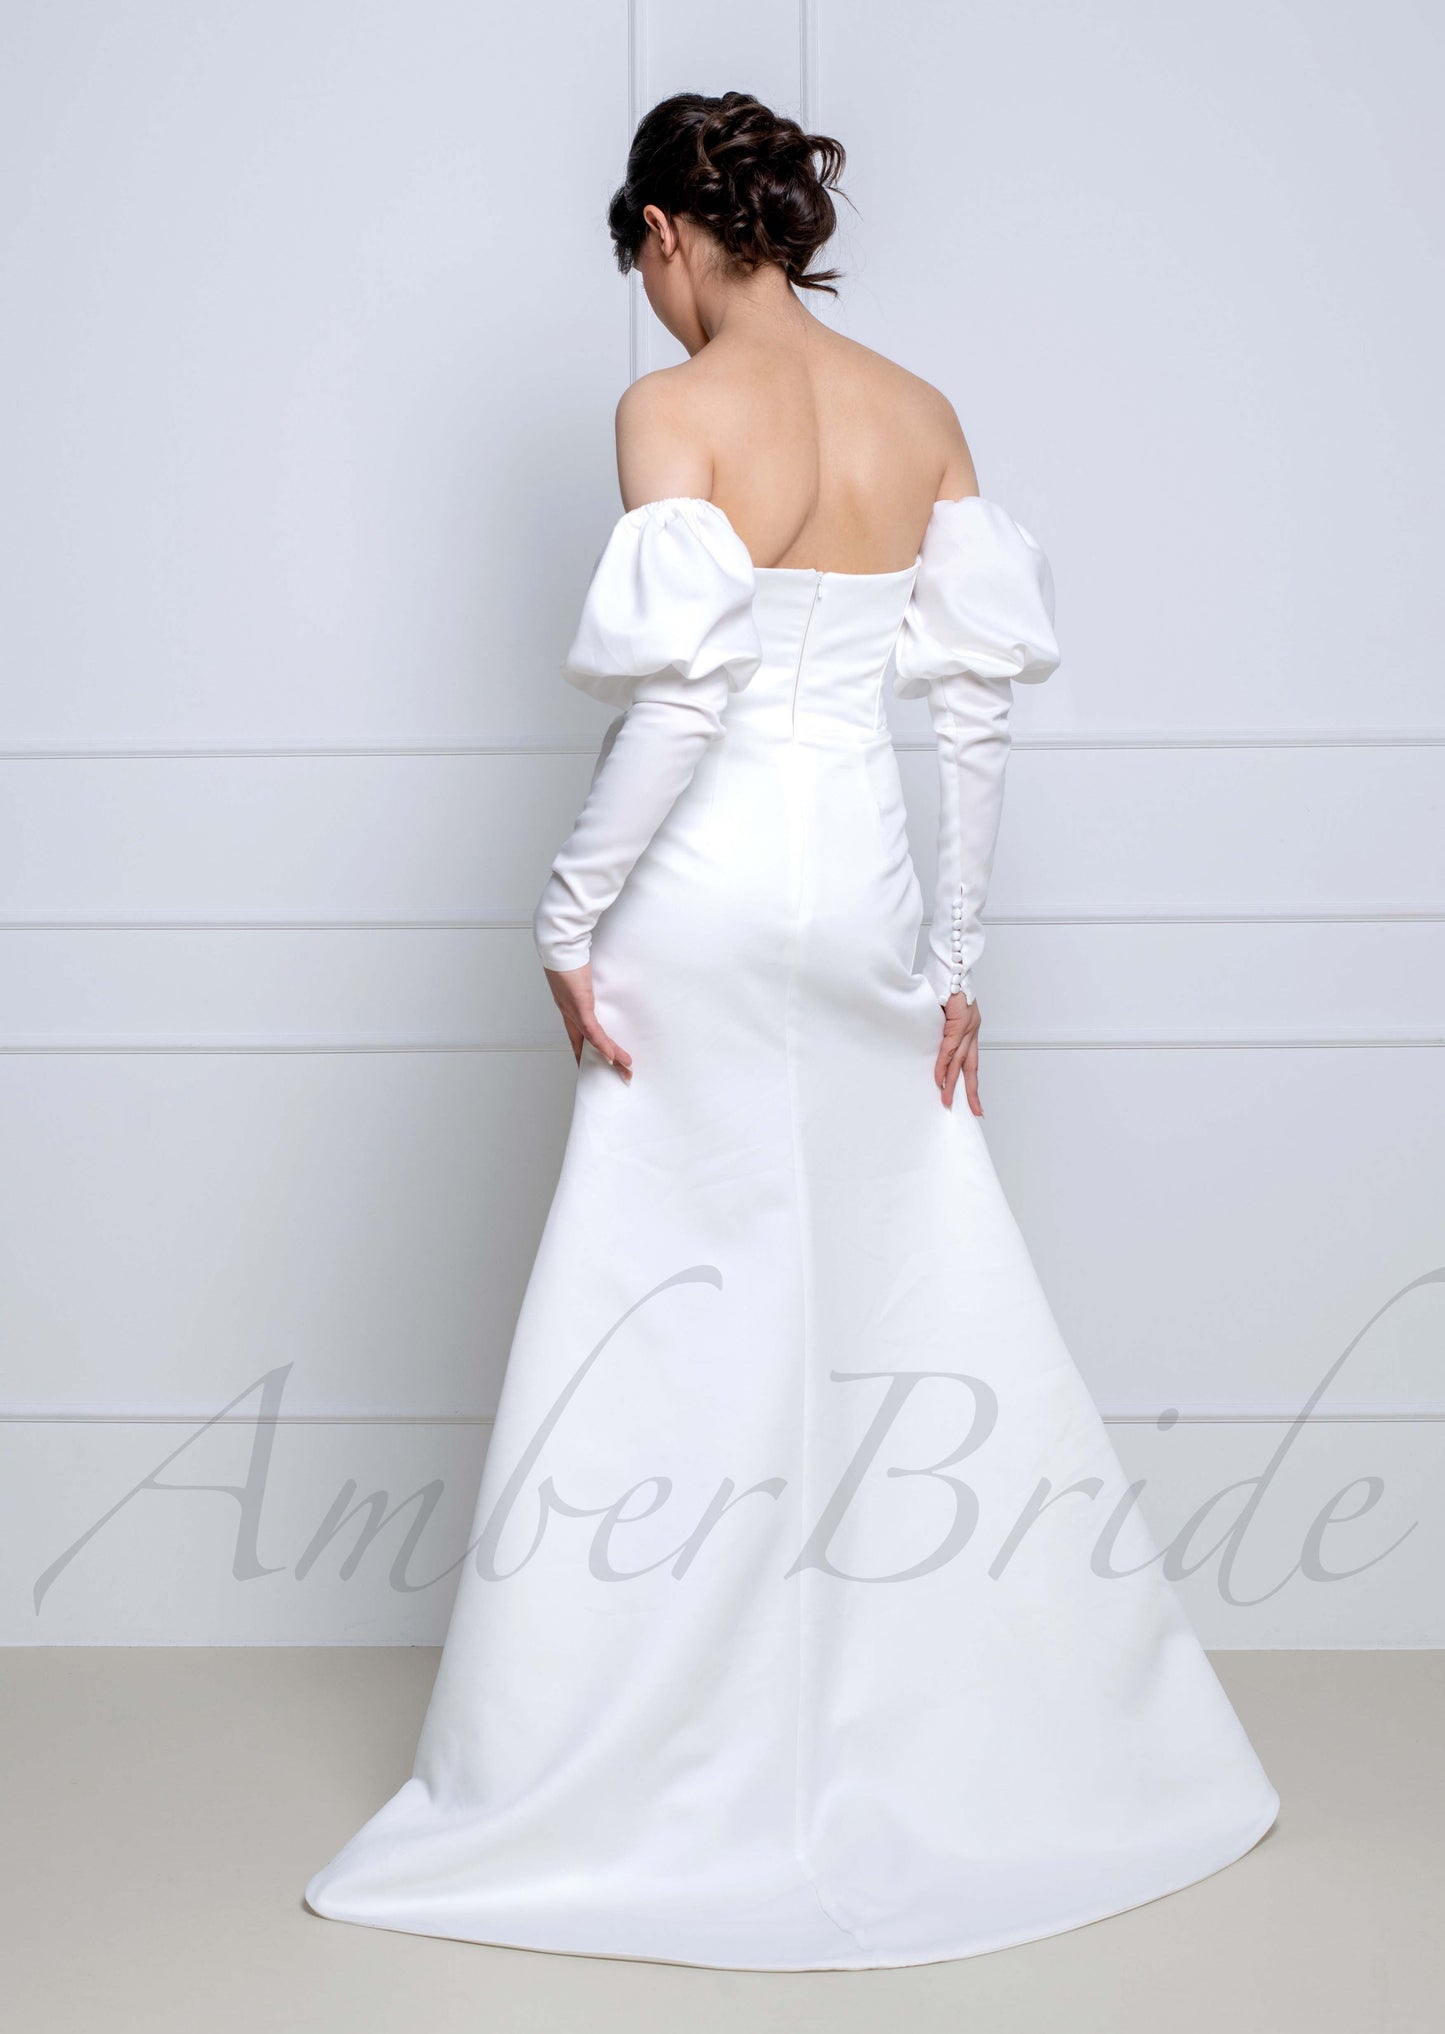 Exquisite Satin Wedding Dress with Overskirt and Bishop Sleeves